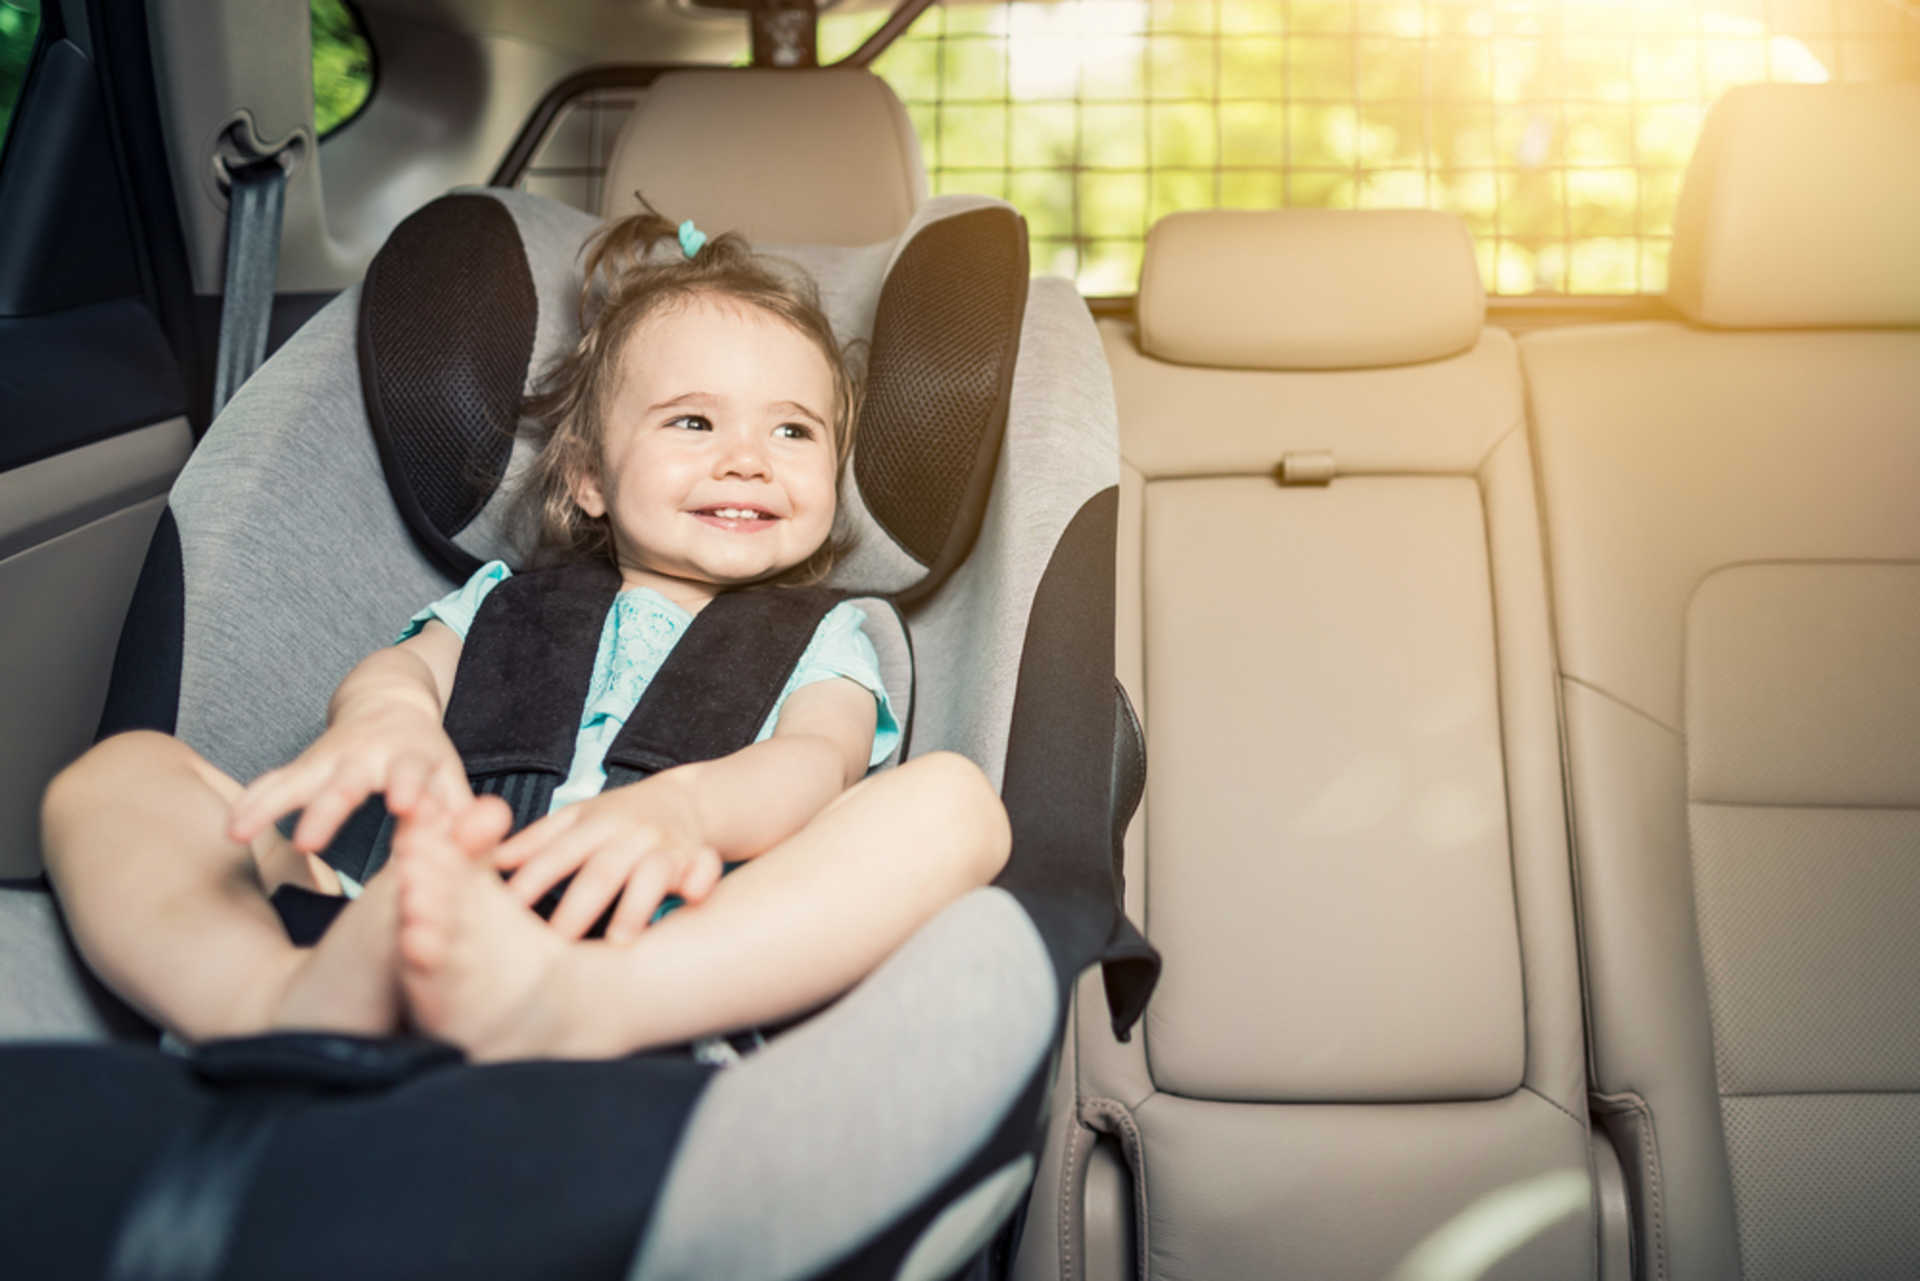 stock-photo-beautyful-smiling-baby-girl-fastened-with-security-belt-in-safety-car-seat-693112123